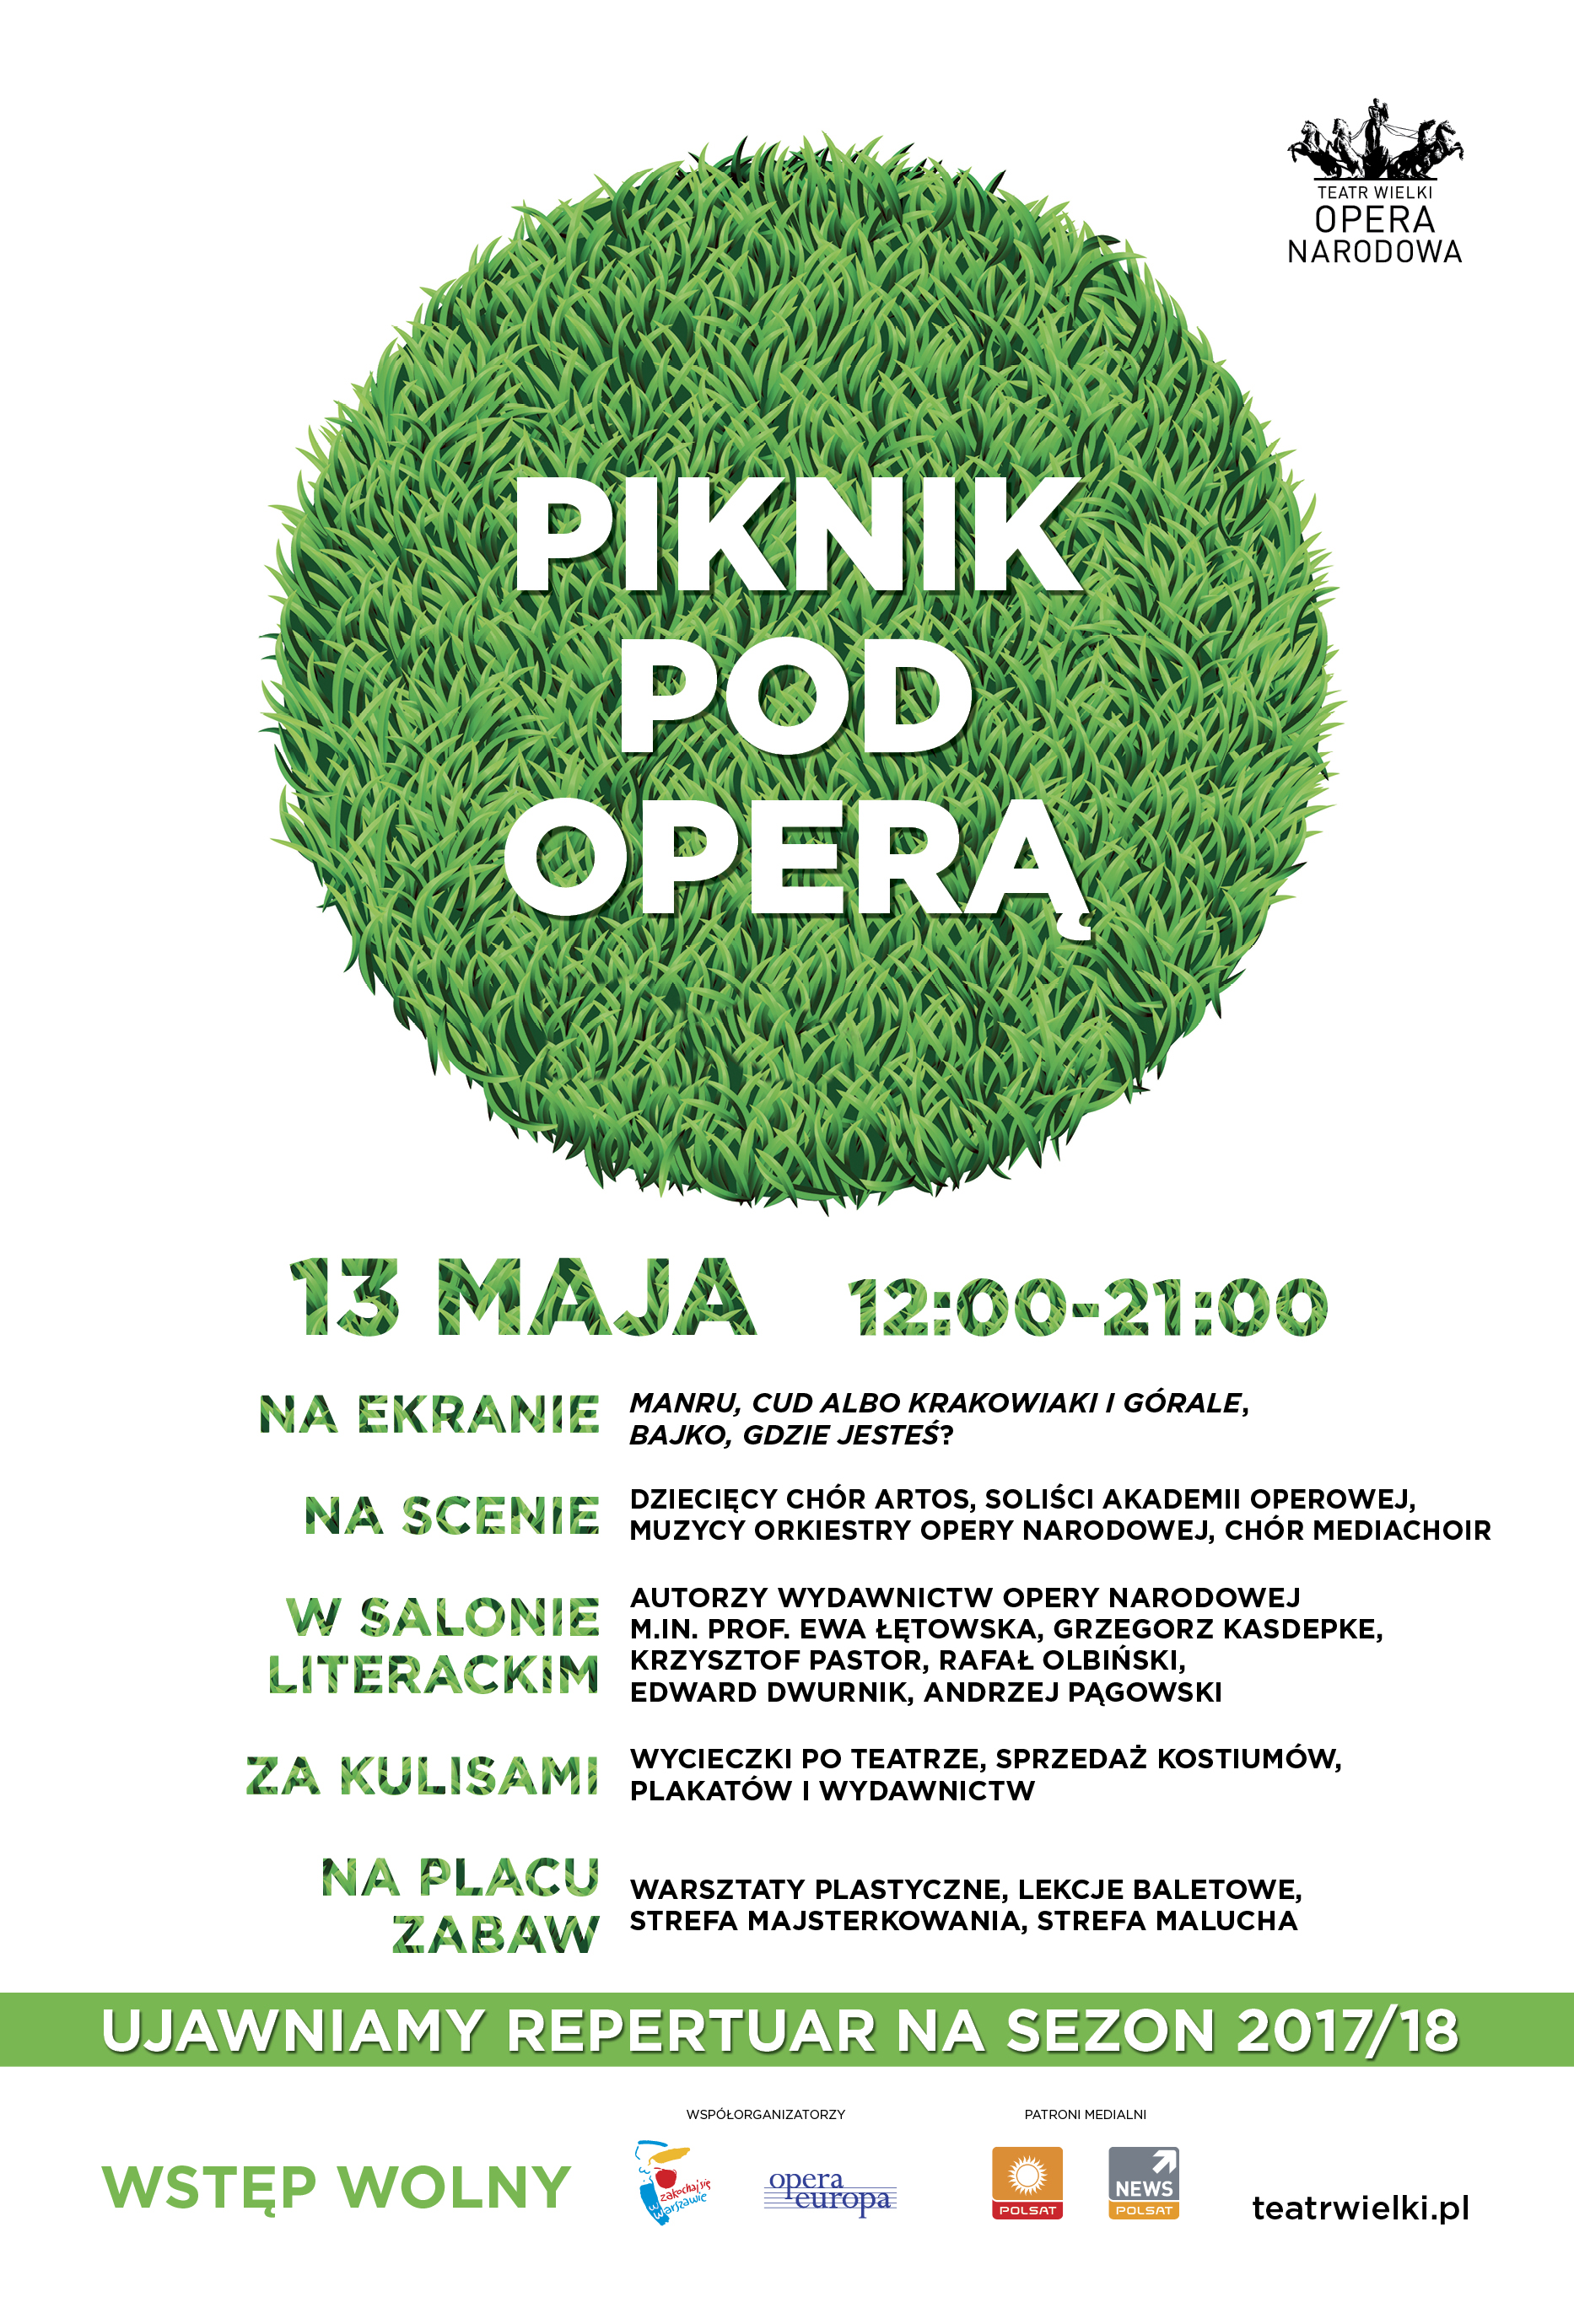 The poster features a green lawn in the shape of the circle on a white background with the inscription 'Picnic By the Opera' running across the image